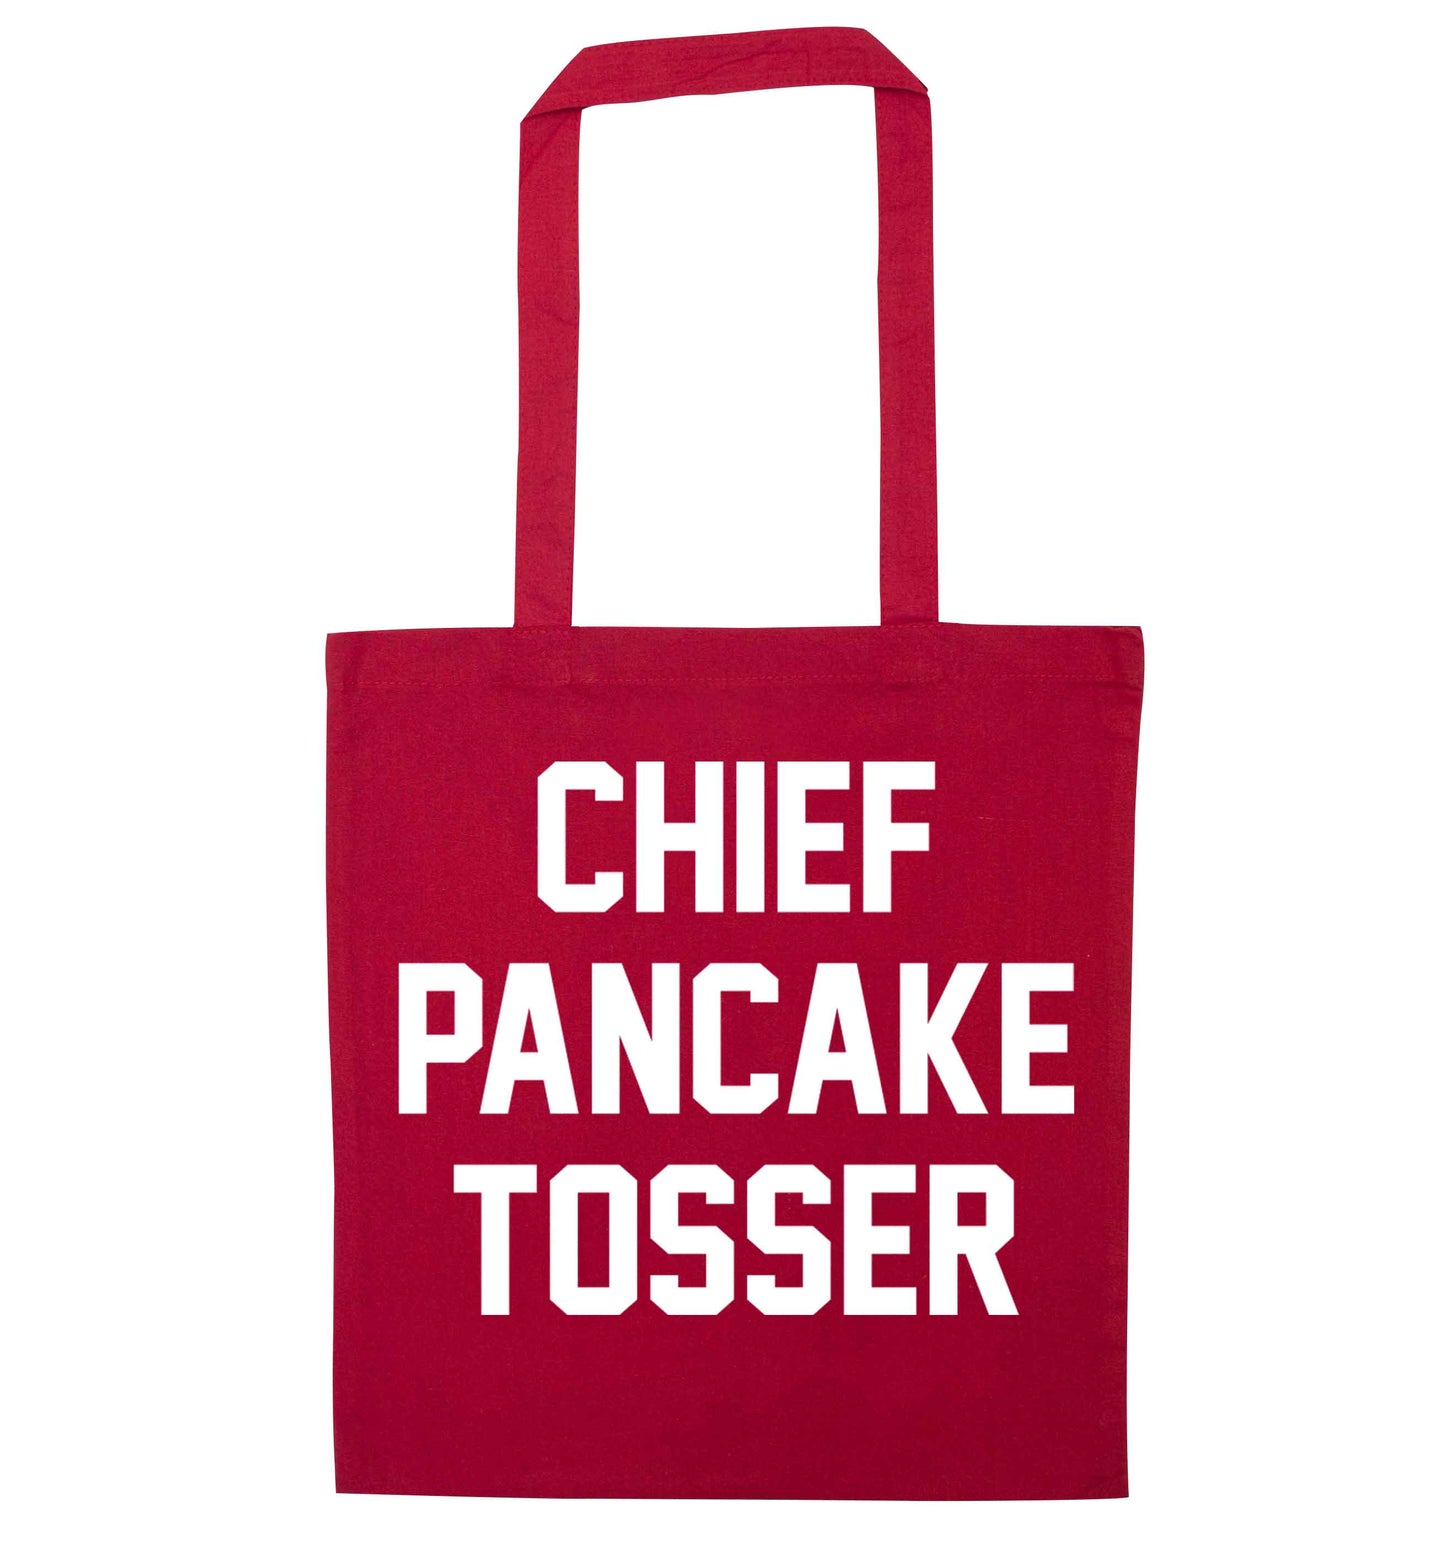 Chief pancake tosser red tote bag